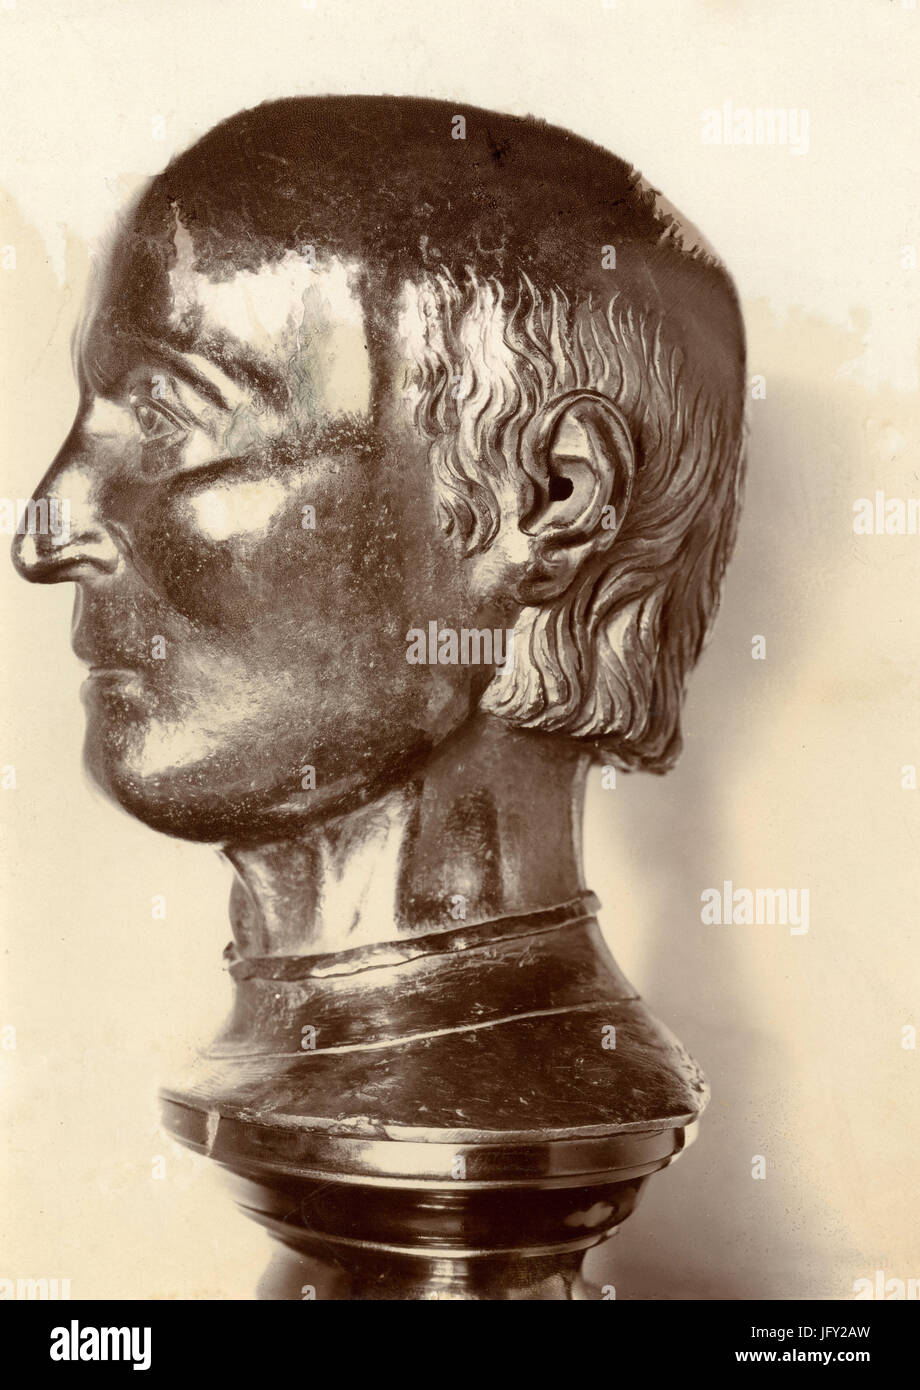 Head of a man, bronze sculpture by Filarete, Italy Stock Photo